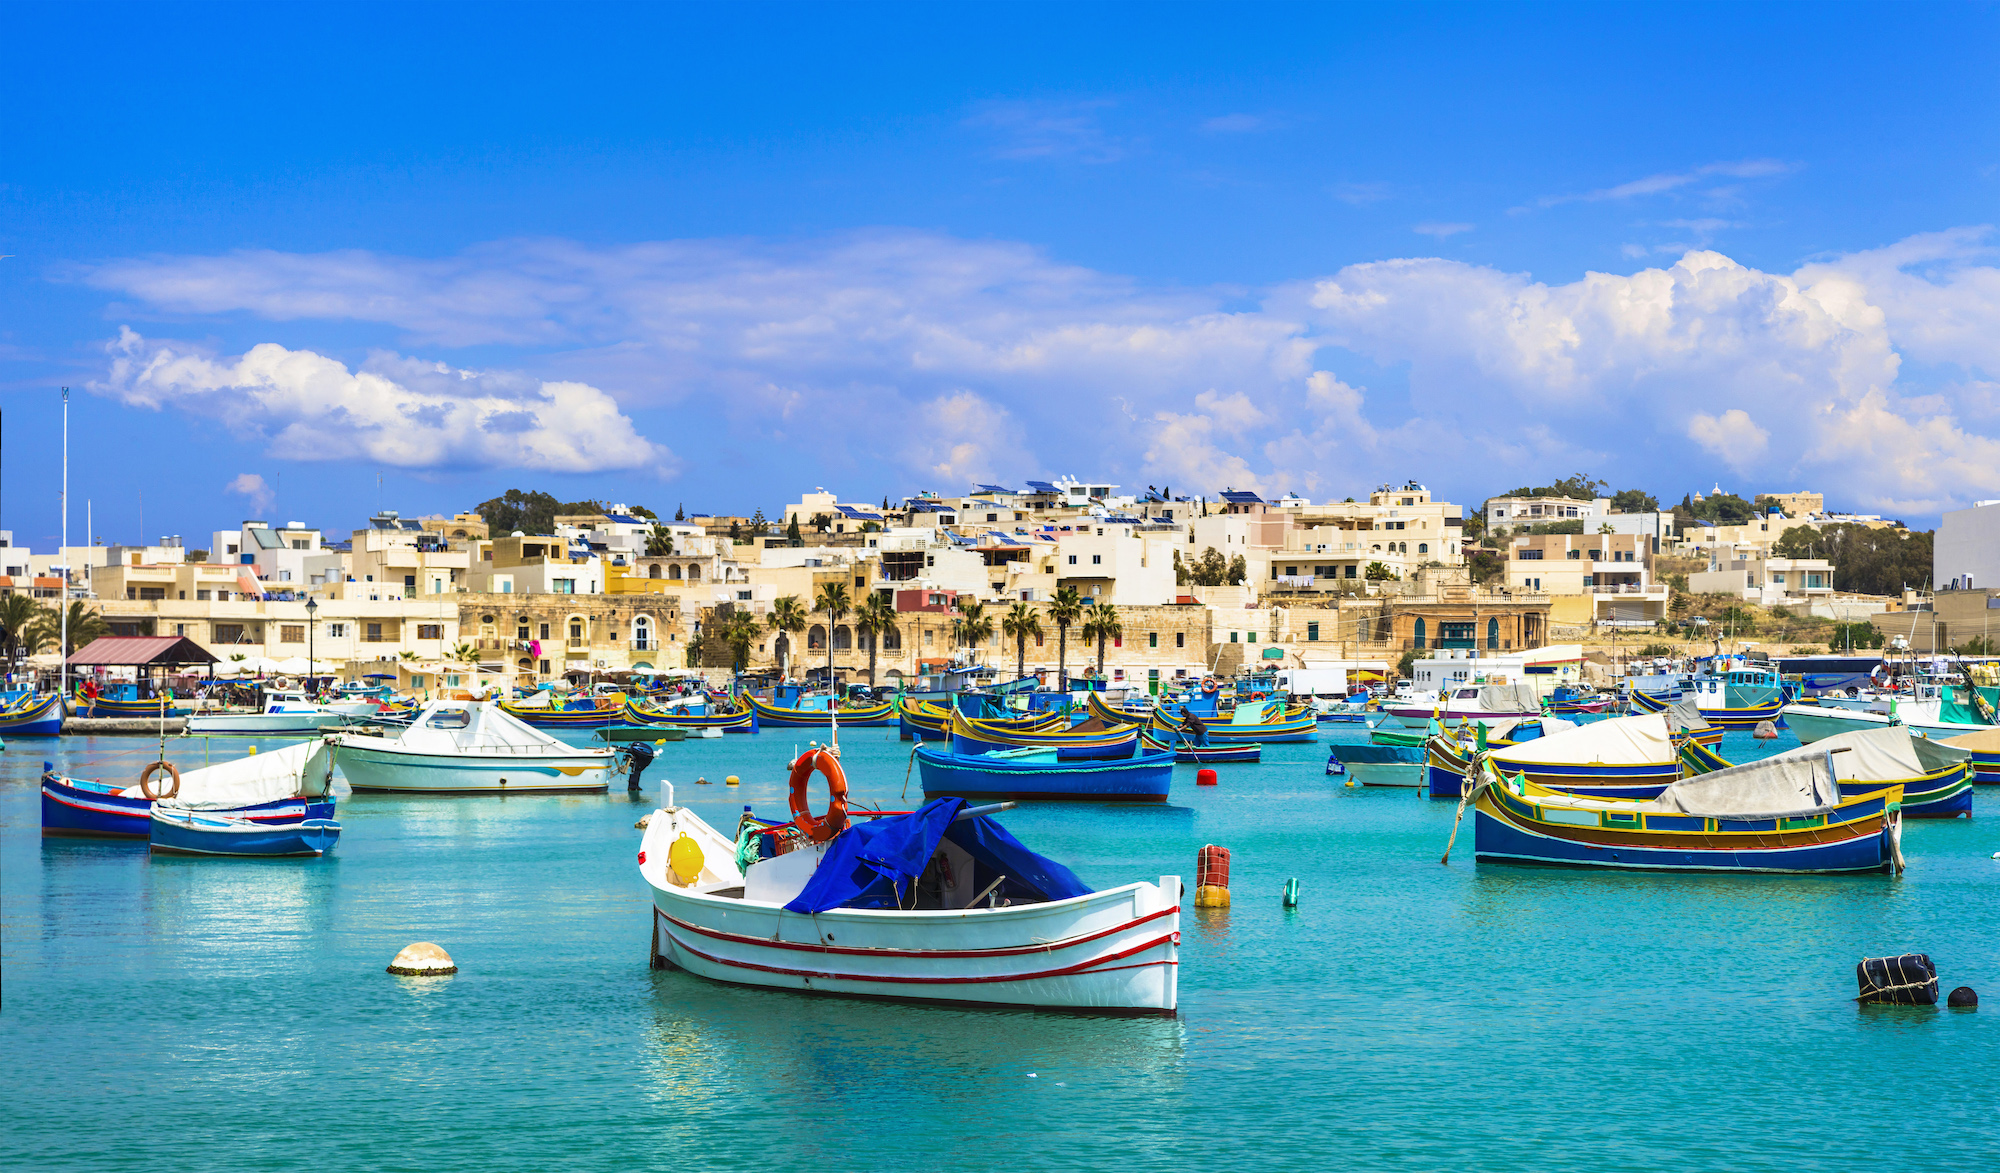 Malta to welcome tourists from summer 2021